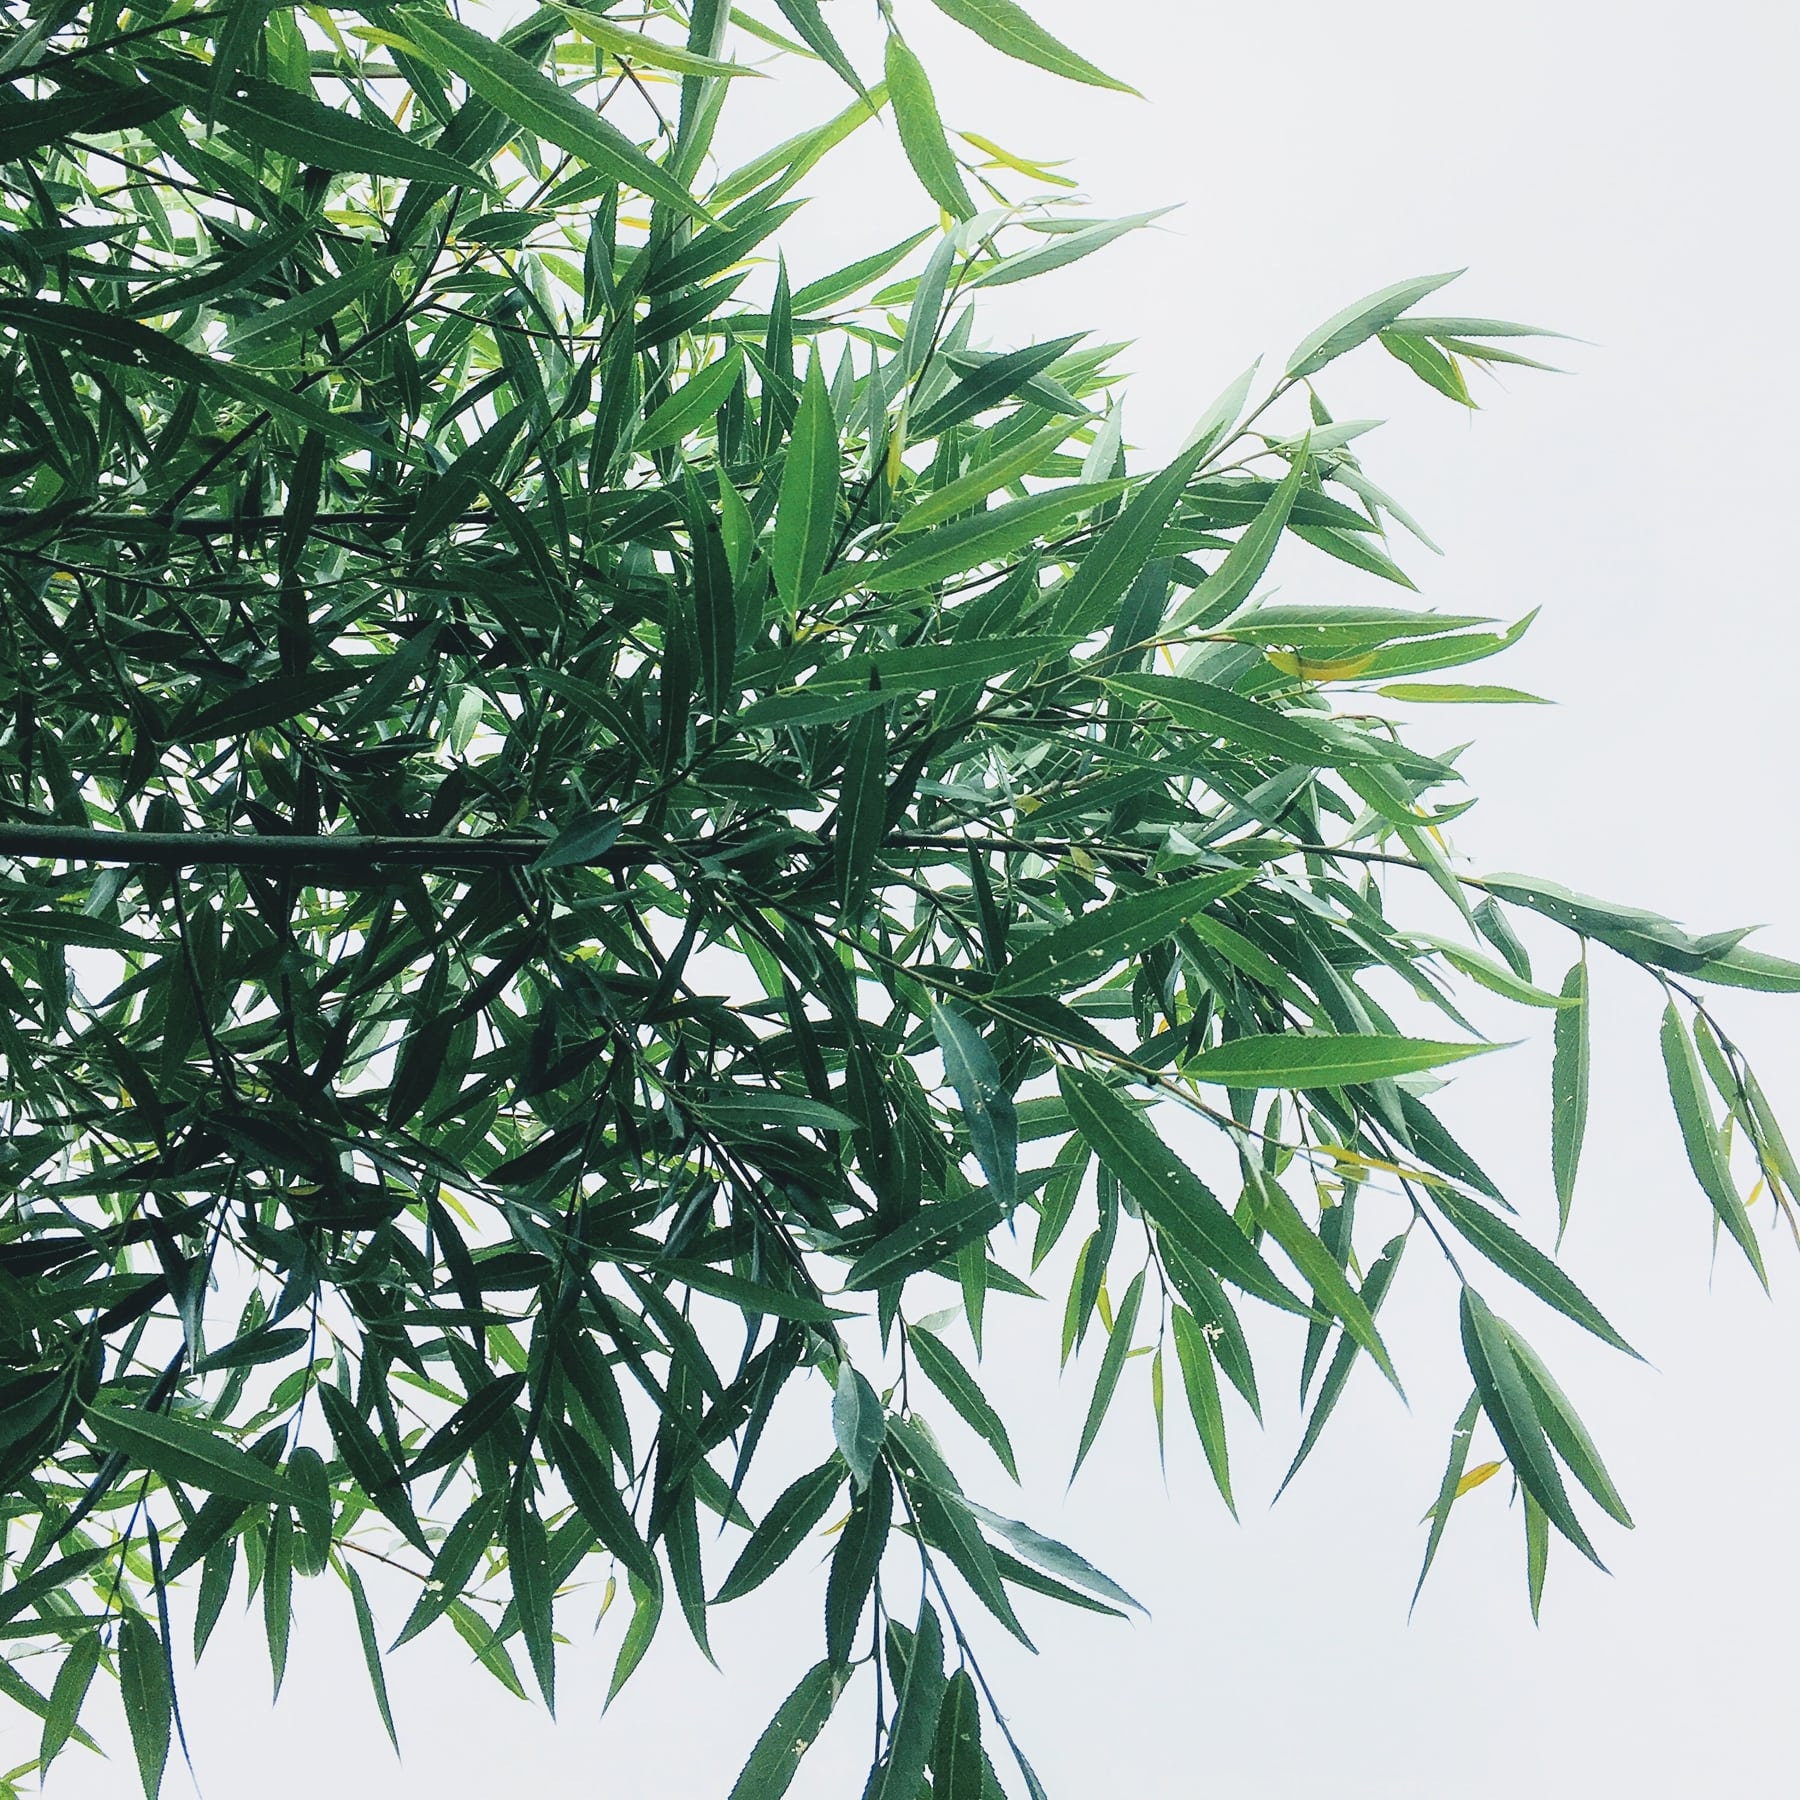 Bamboo leaves in front of a blue sky